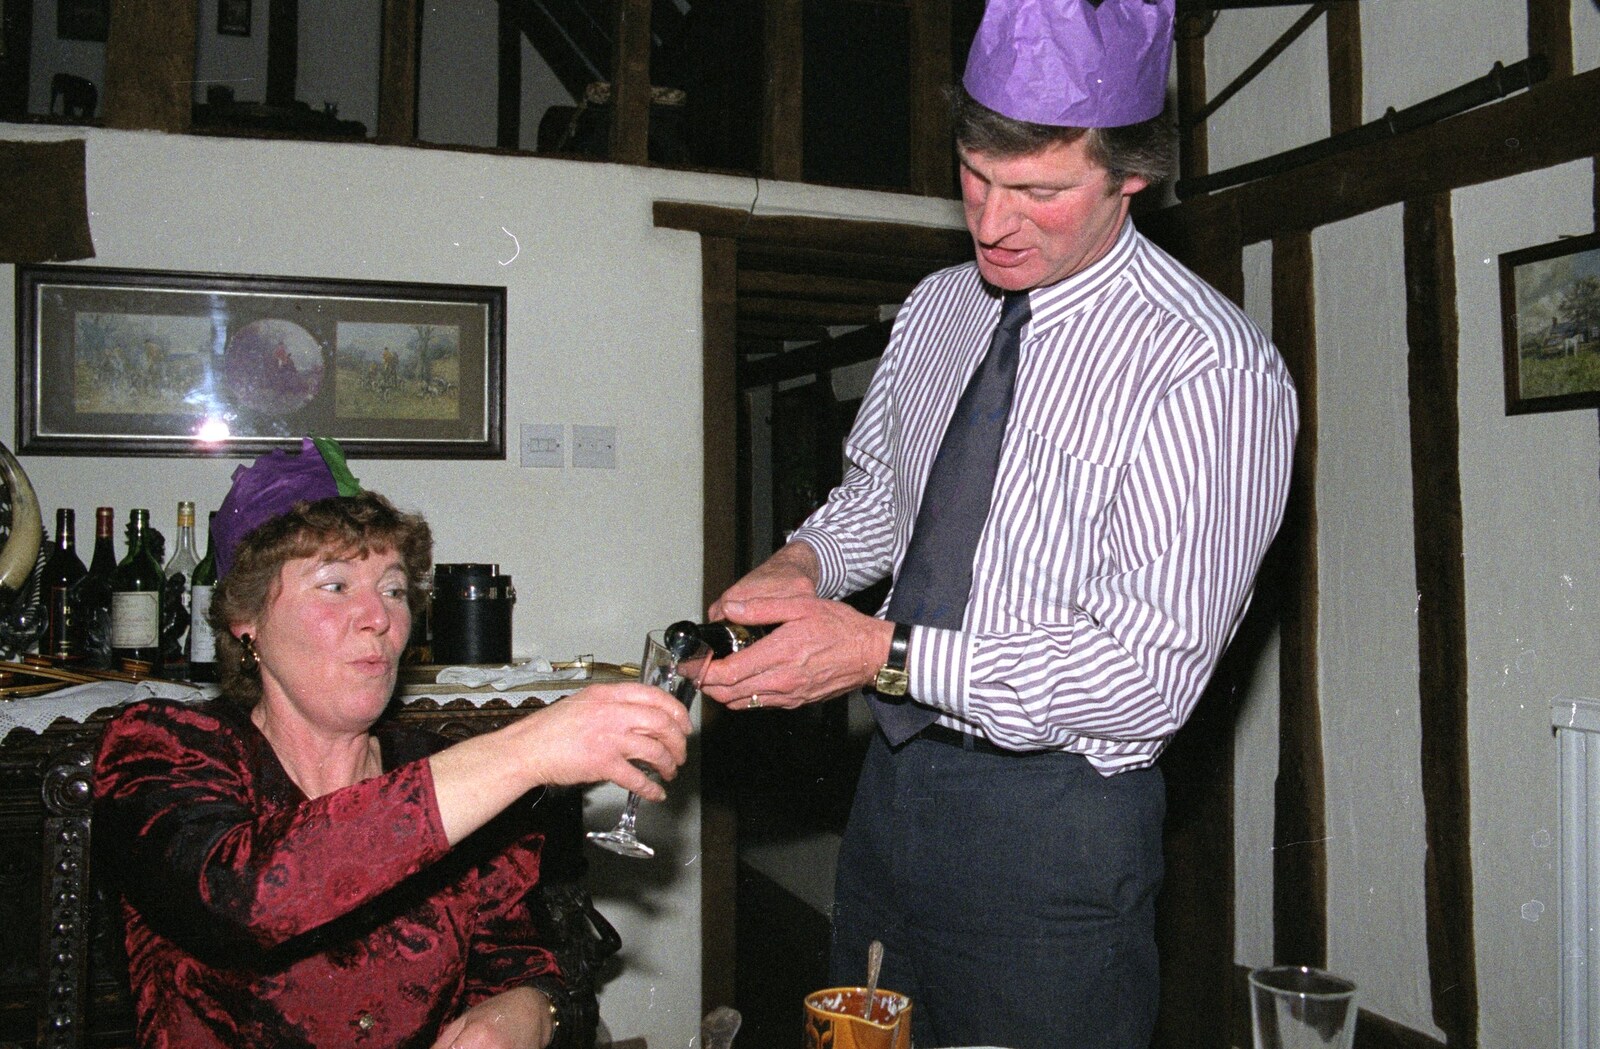 Geoff pours out some fizz from Christmas Dinner with Geoff and Brenda, Stuston, Suffolk - 25th December 1990